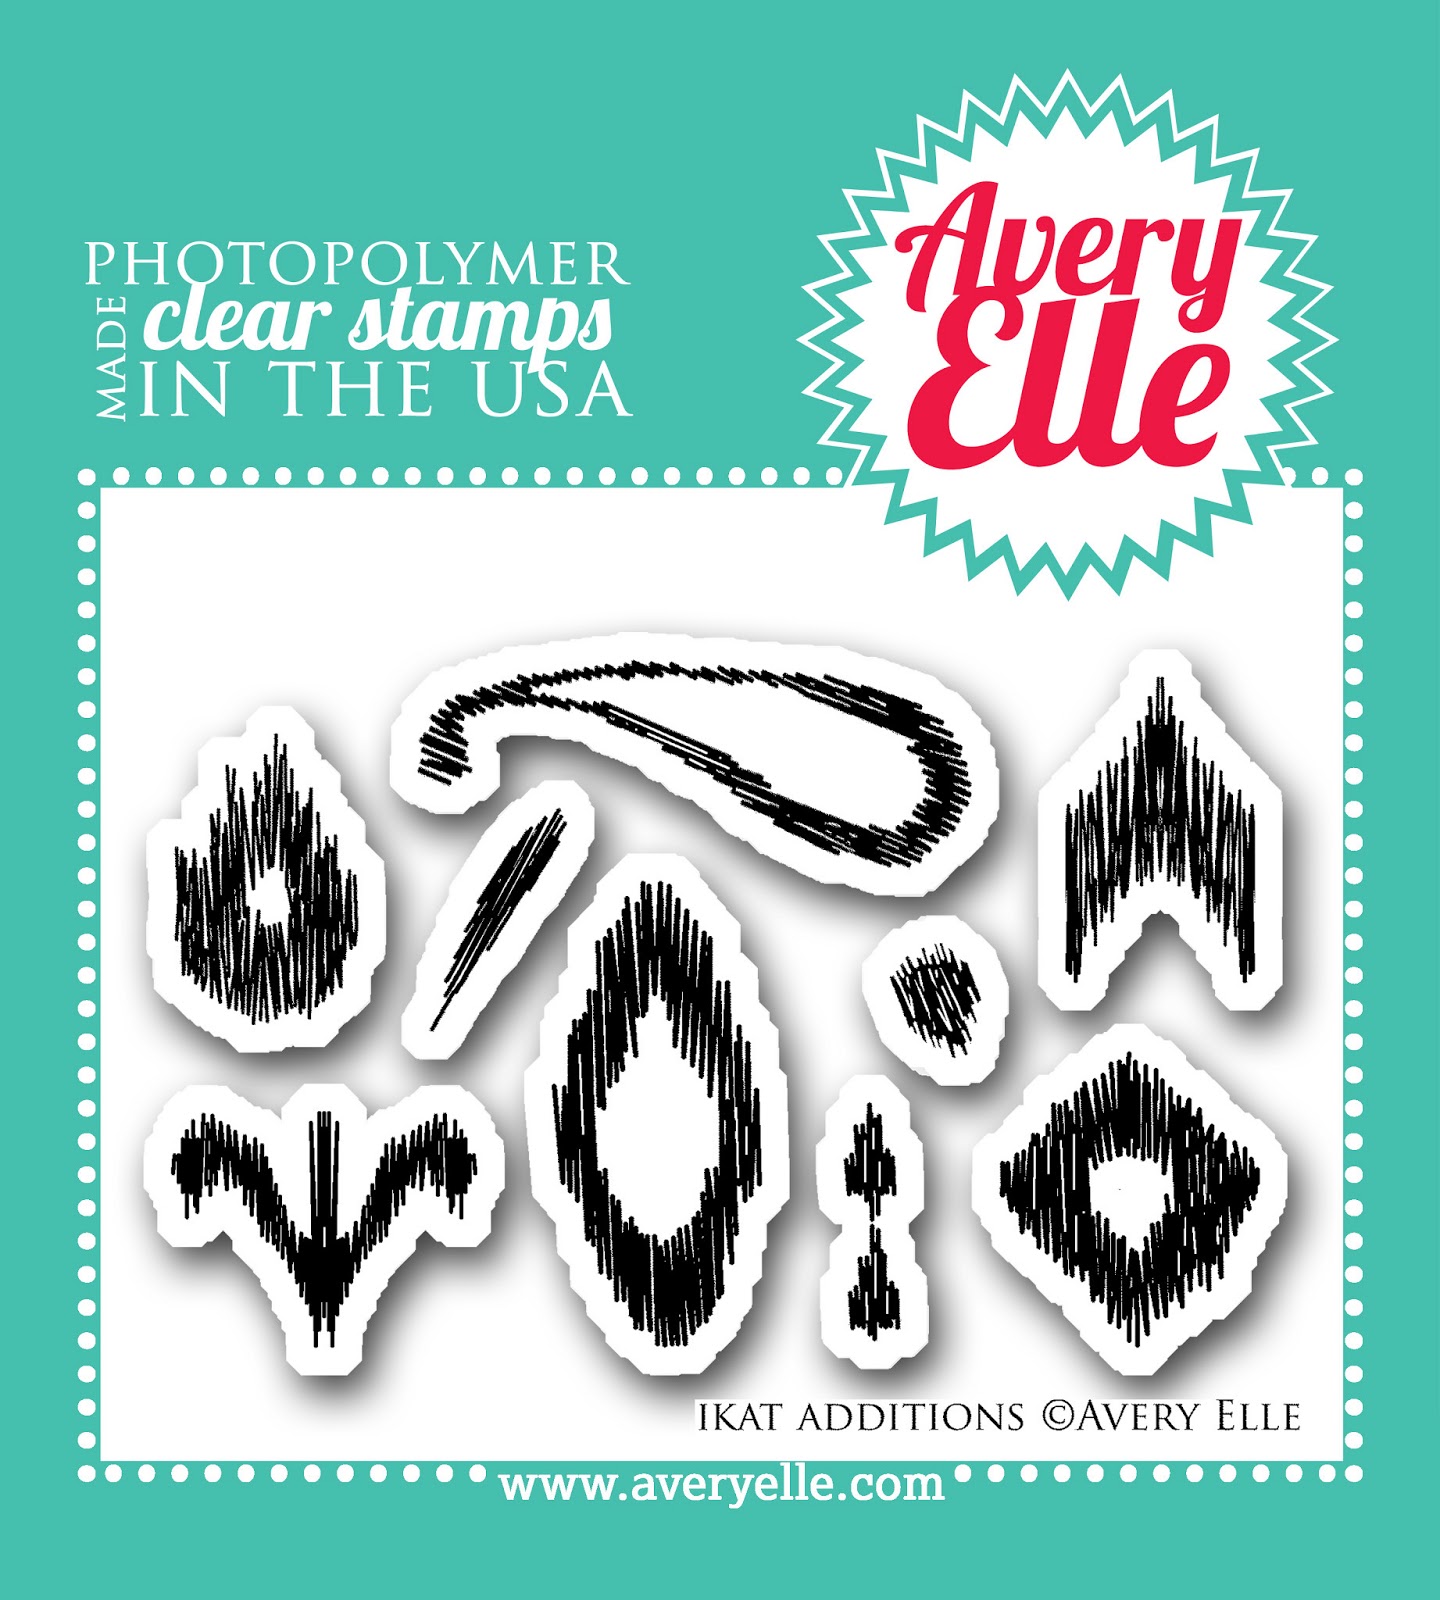 Avery Elle "OH HAPPY DAY" Clear Photopolymer Stamps Set 